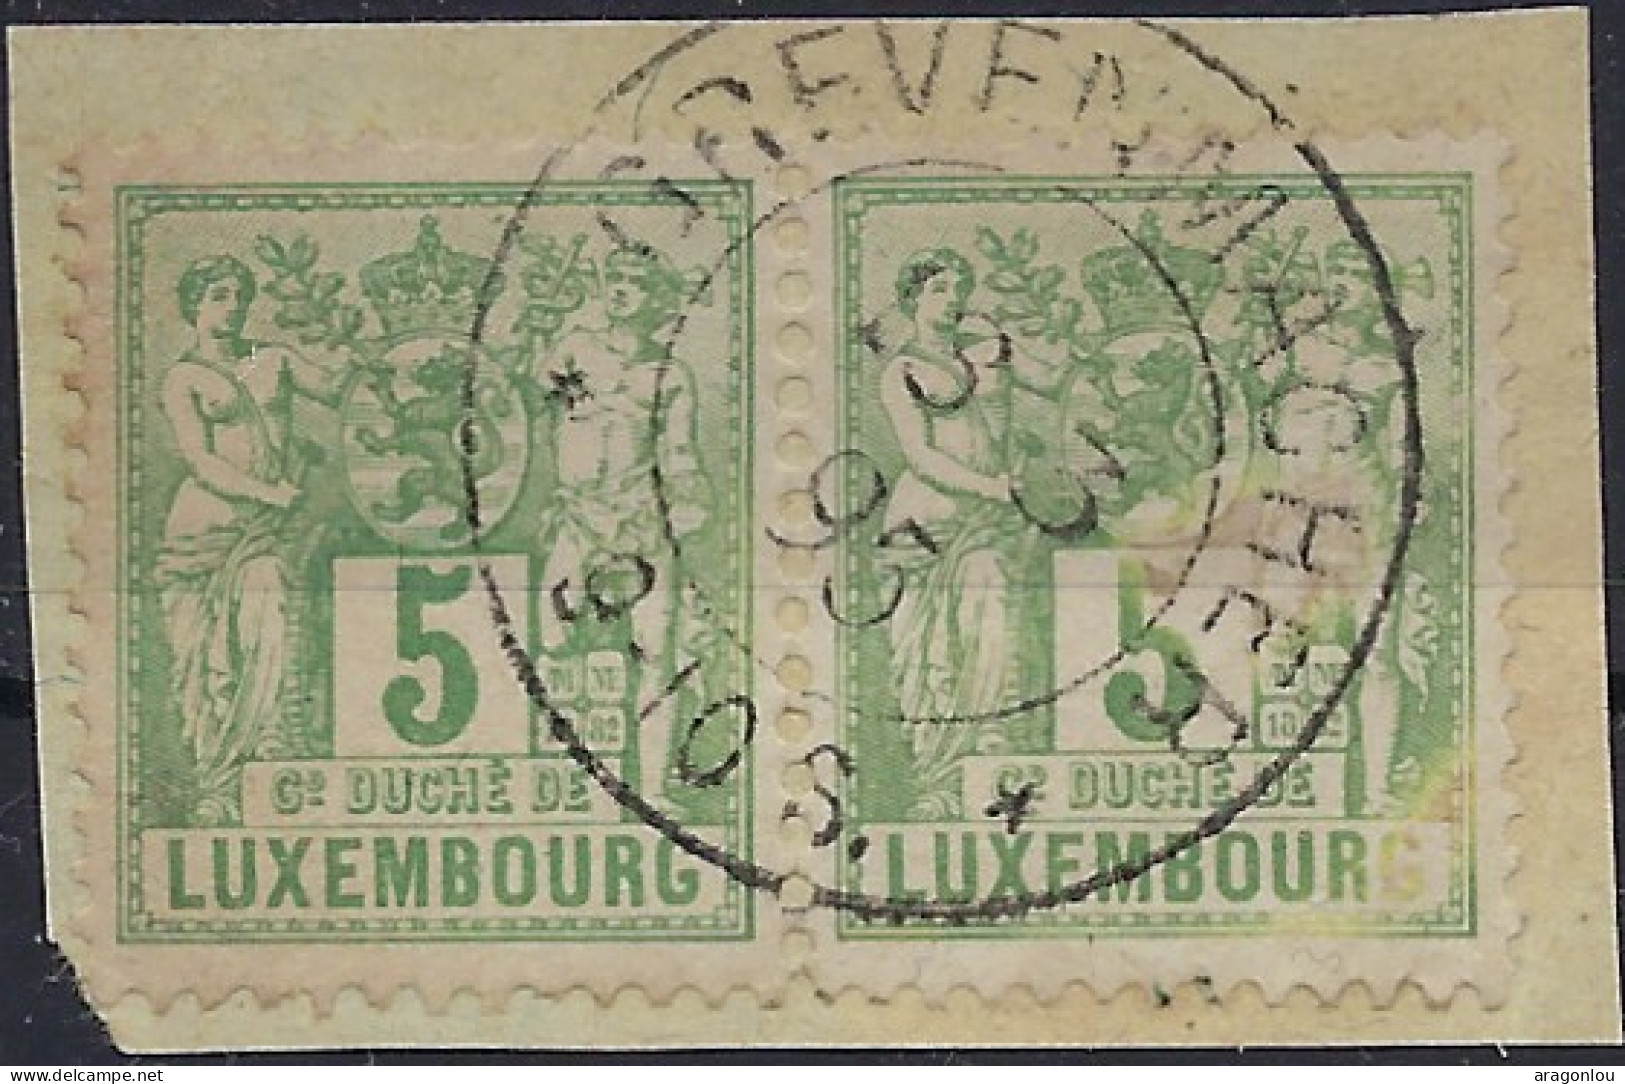 Luxembourg - Luxemburg - Timbres - Taxes  -  Timbres Paire   Cachet Sur Papier - Postage Due